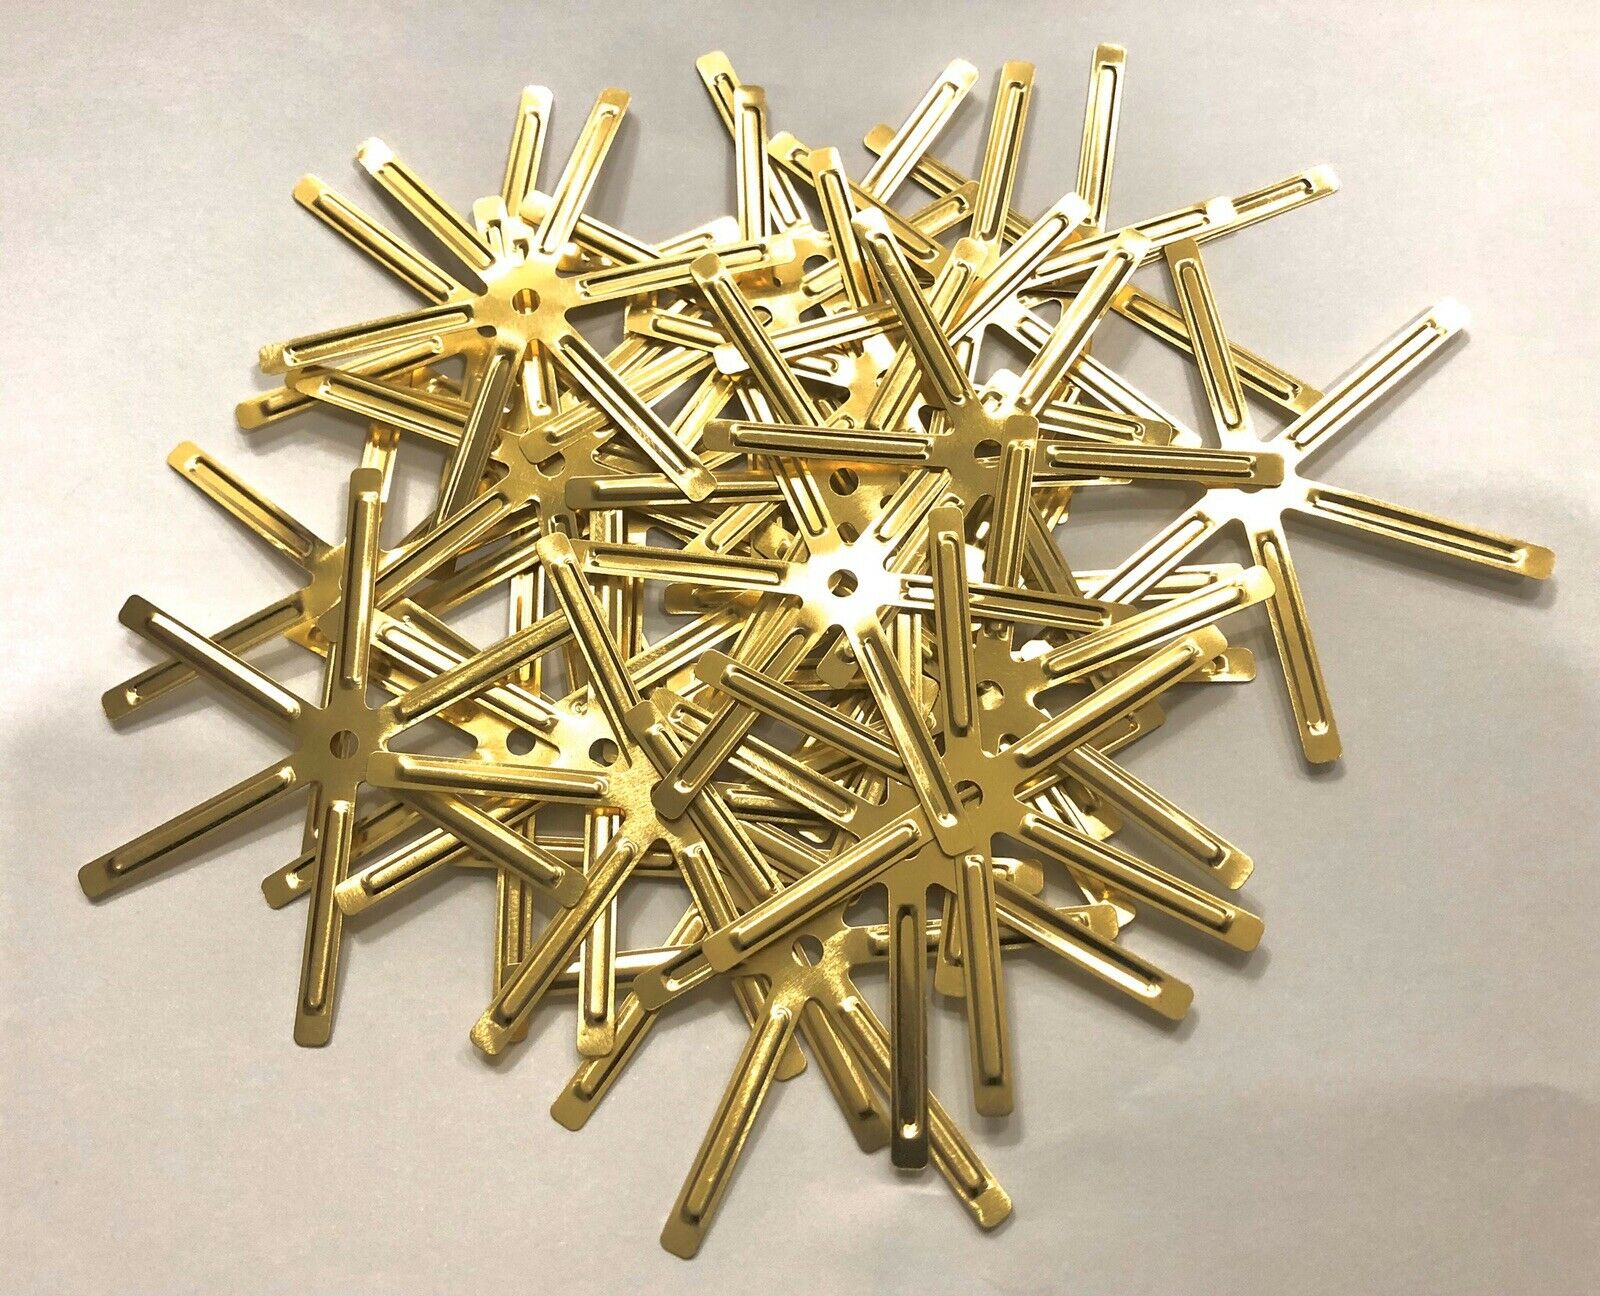 Premium Quality Universal Brass Golf Shims .335 to .350 / .355 to .370 - The Golf Club Trader